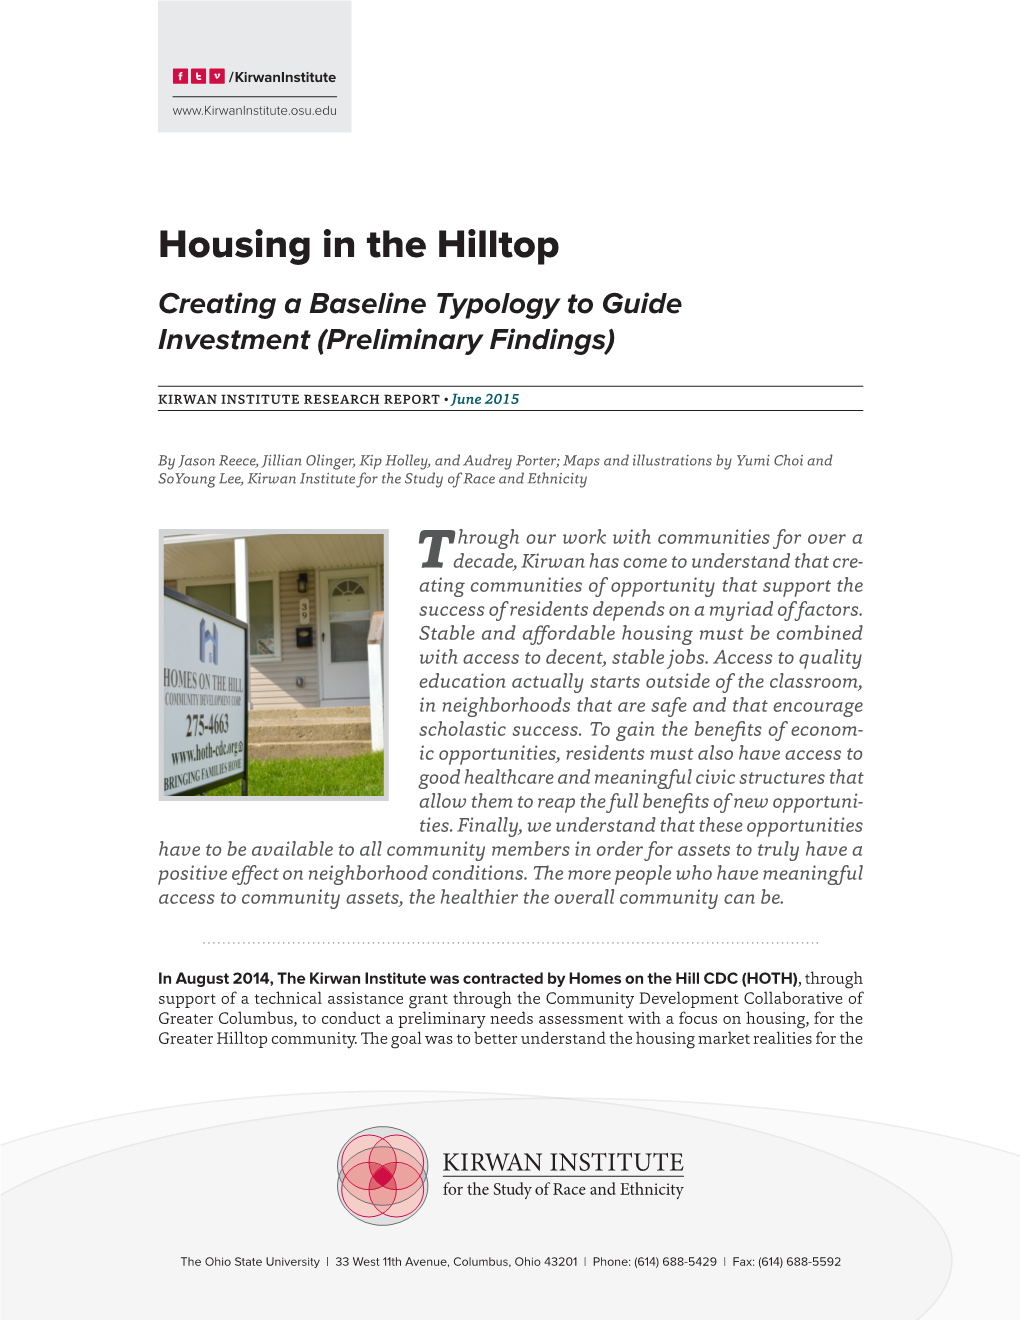 Download Housing in the Hilltop Report